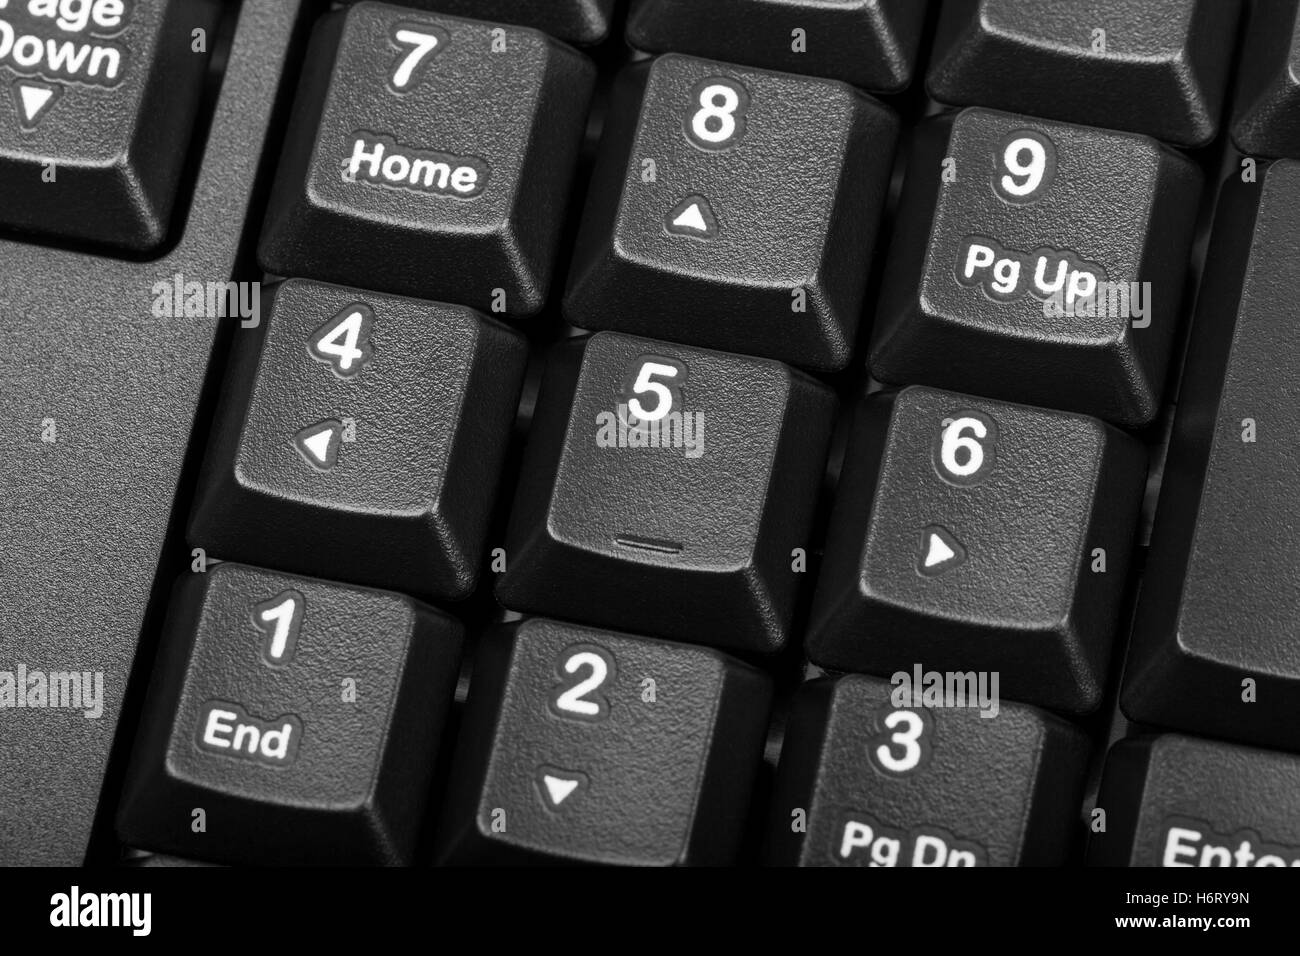 Electronic collection - detail numeric keypad on the black computer keyboard Stock Photo